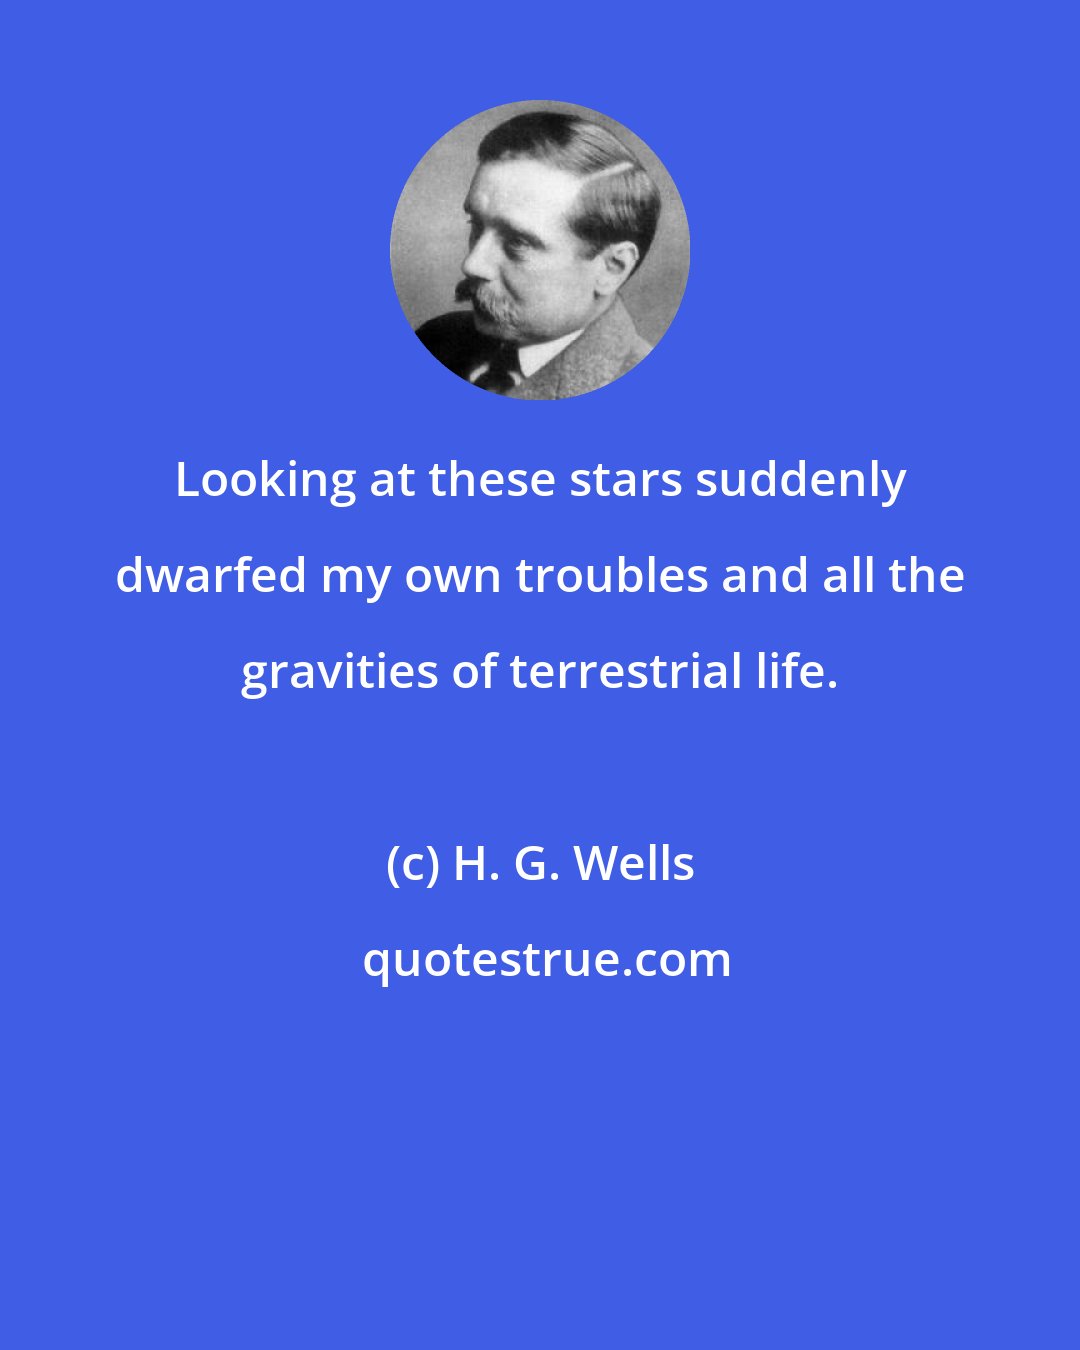 H. G. Wells: Looking at these stars suddenly dwarfed my own troubles and all the gravities of terrestrial life.